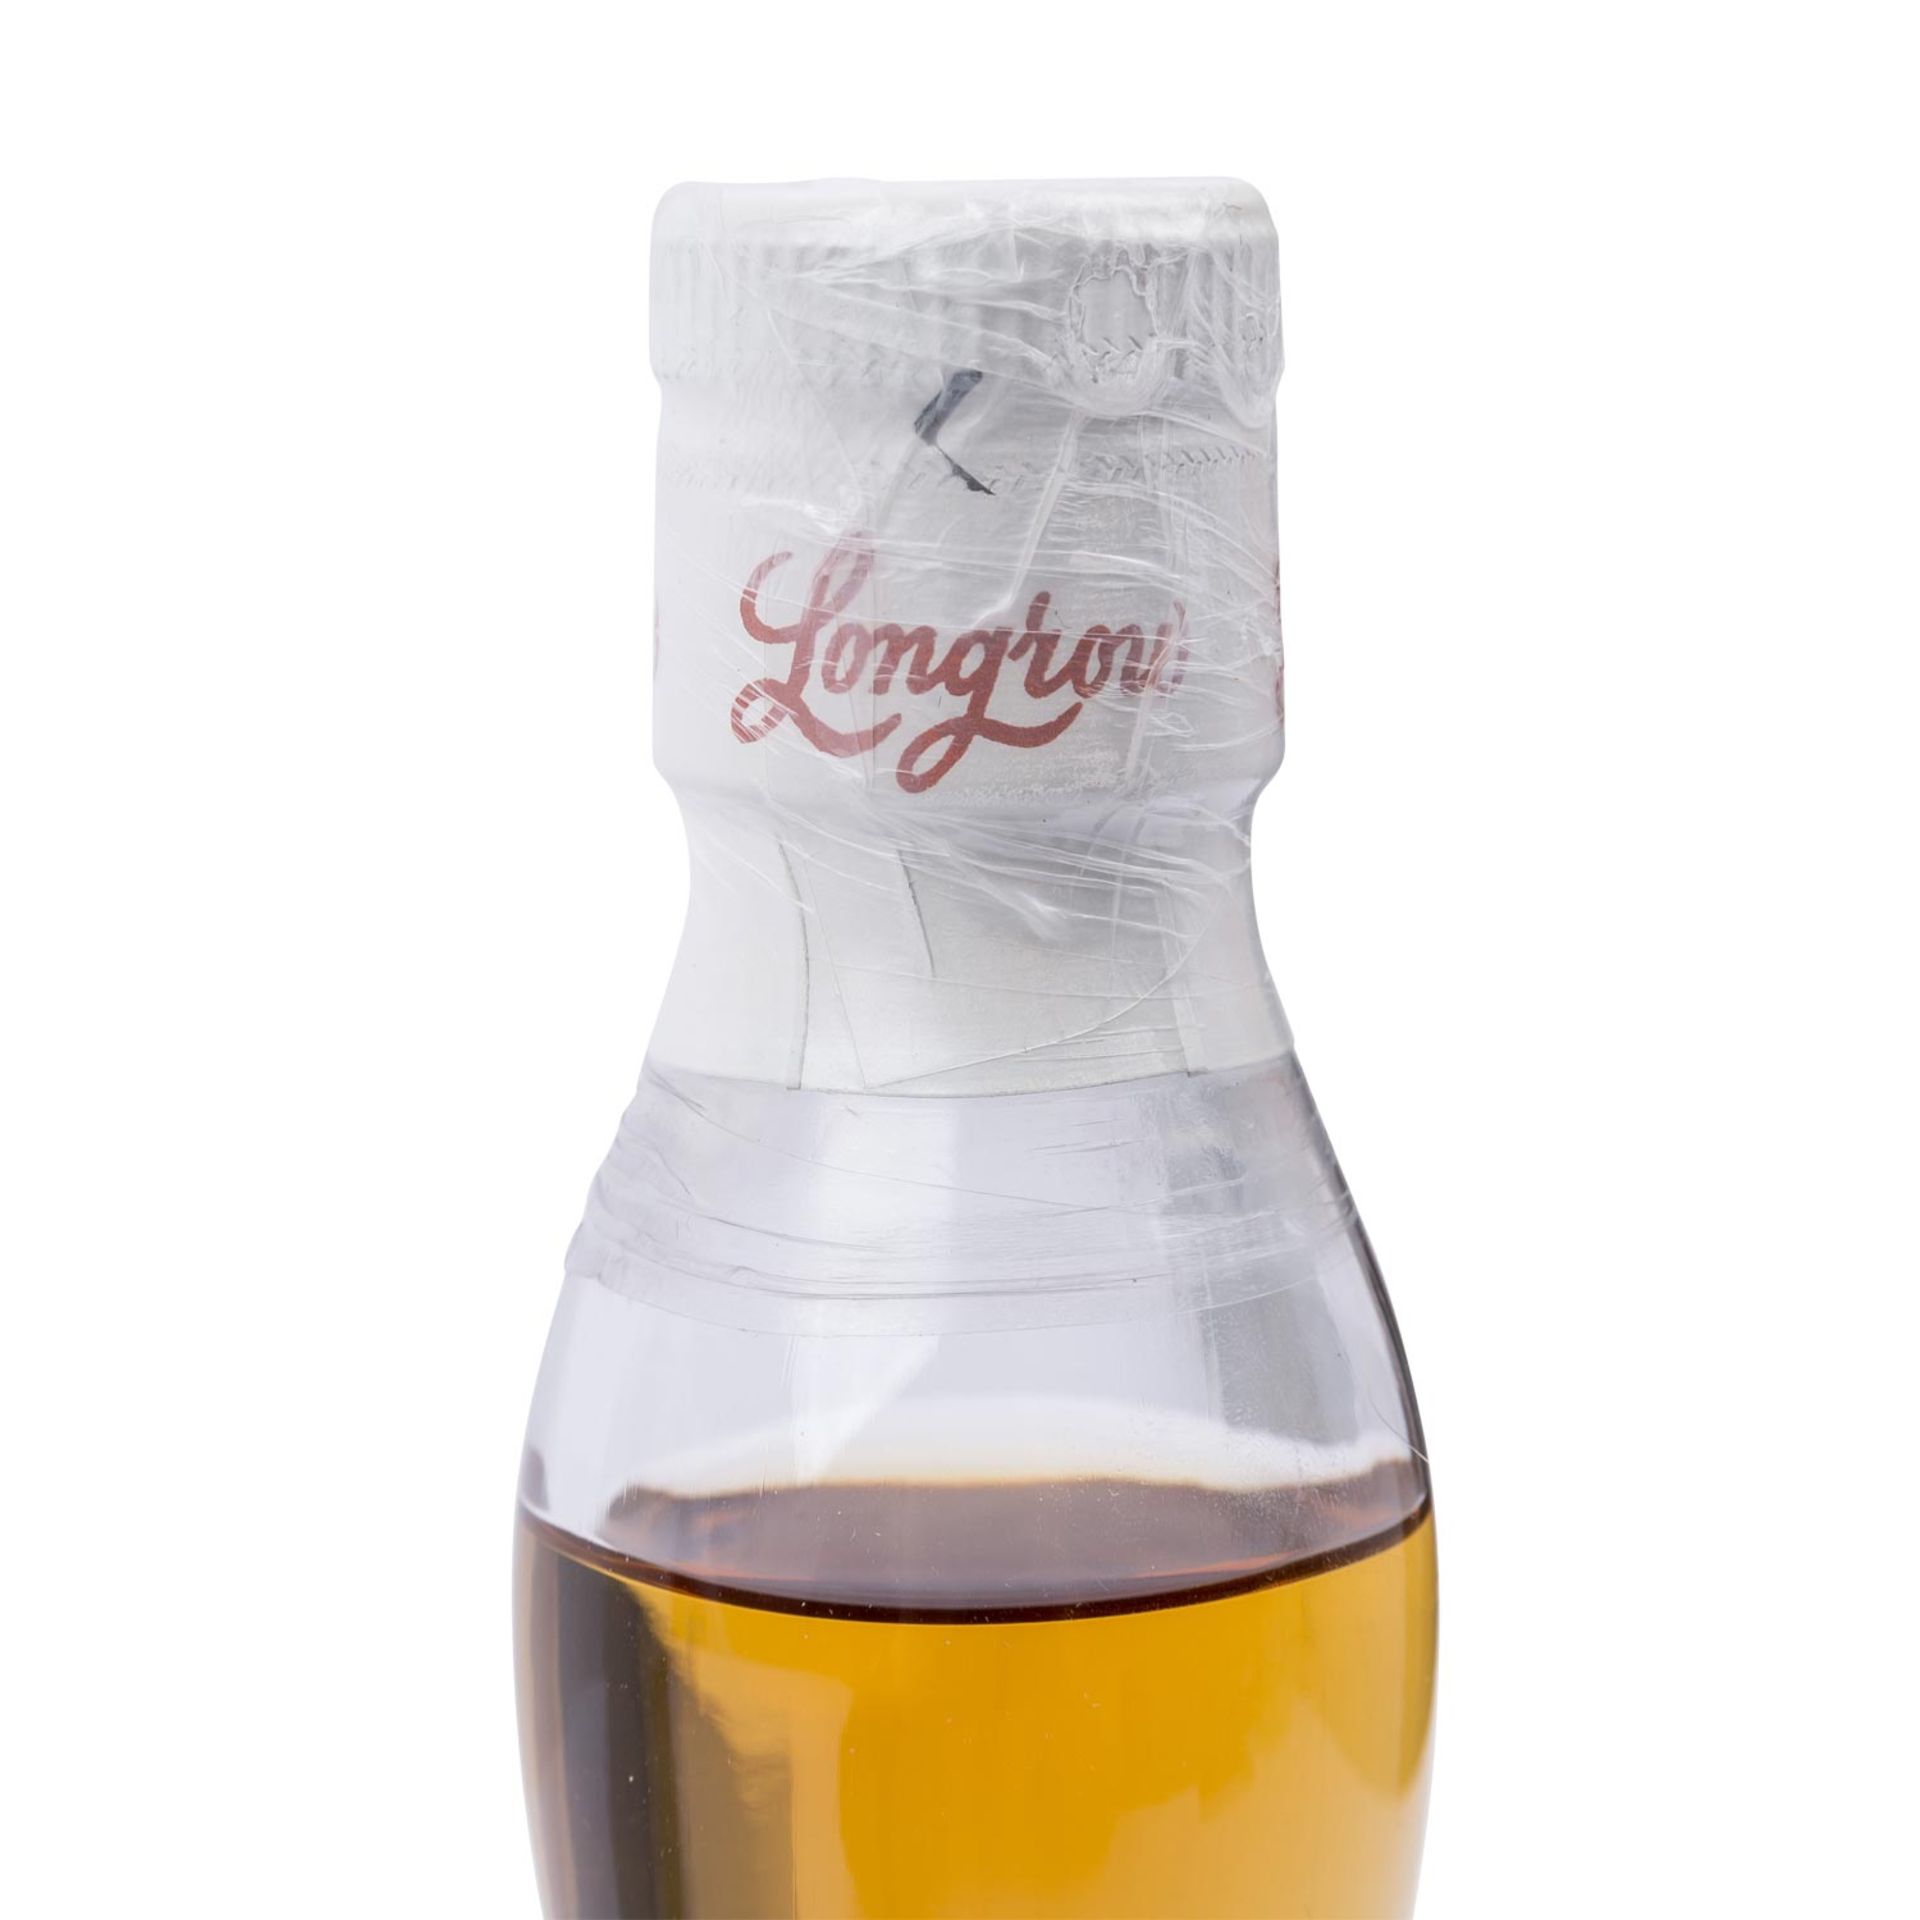 LONGROW Limited Edition Campbeltown Single Malt Scotch Whisky '18 Years old' - Image 3 of 3